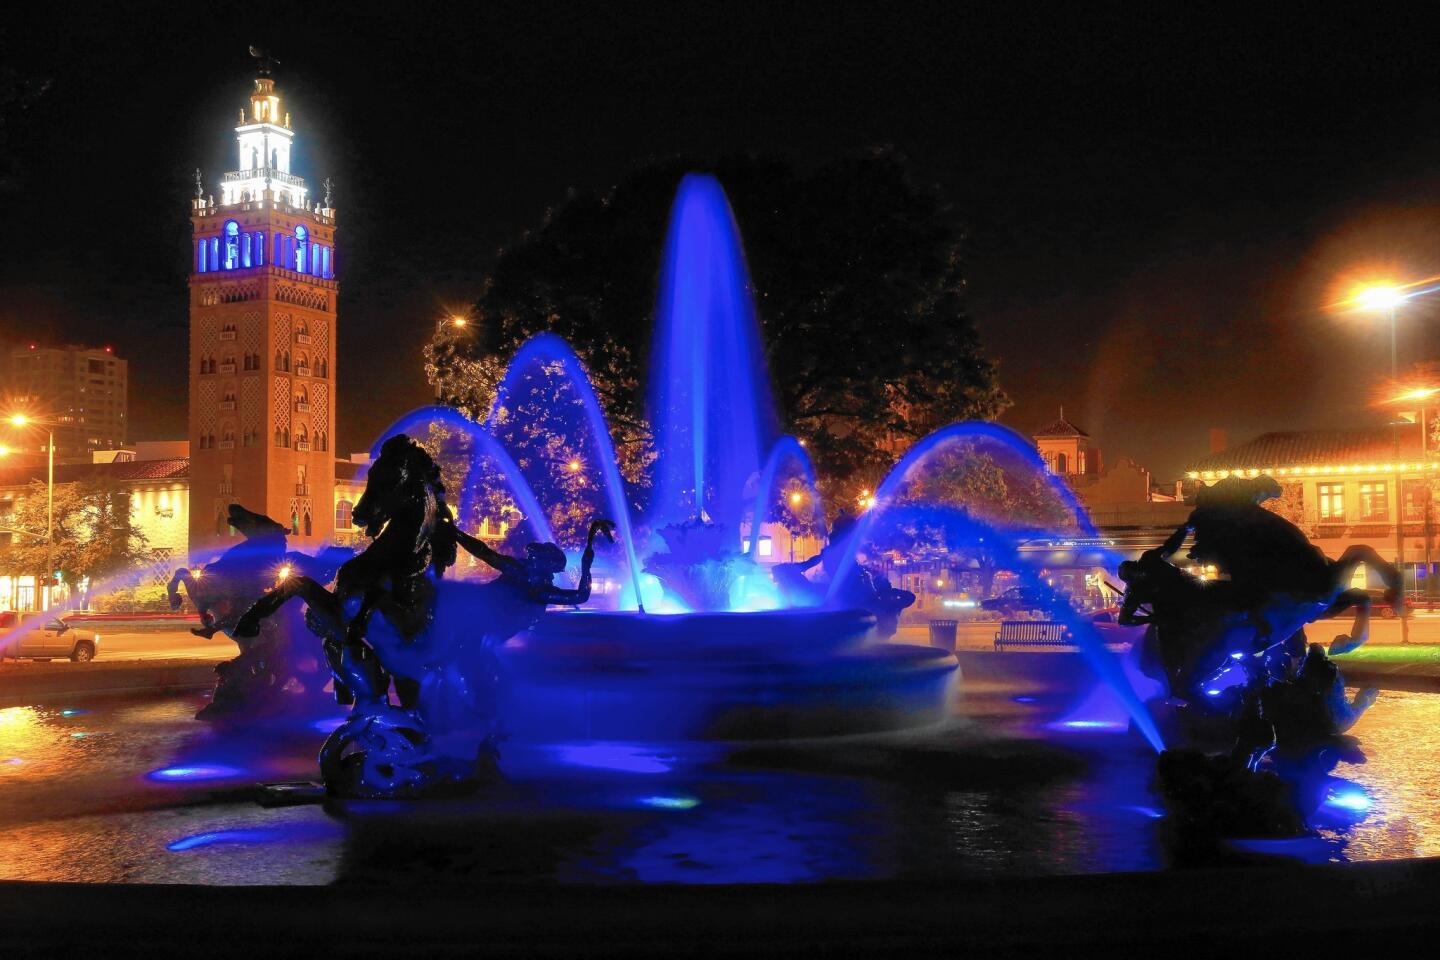 J.C. Nichols Memorial Fountain in Kansas City, Mo. sprays blue water in front of the Country Club Plaza in honor of the Kansas City Royals' World Series win in November. Fountains are ingrained in Kansas City’s identity and more than 200 throughout the city offer gurgling oases.